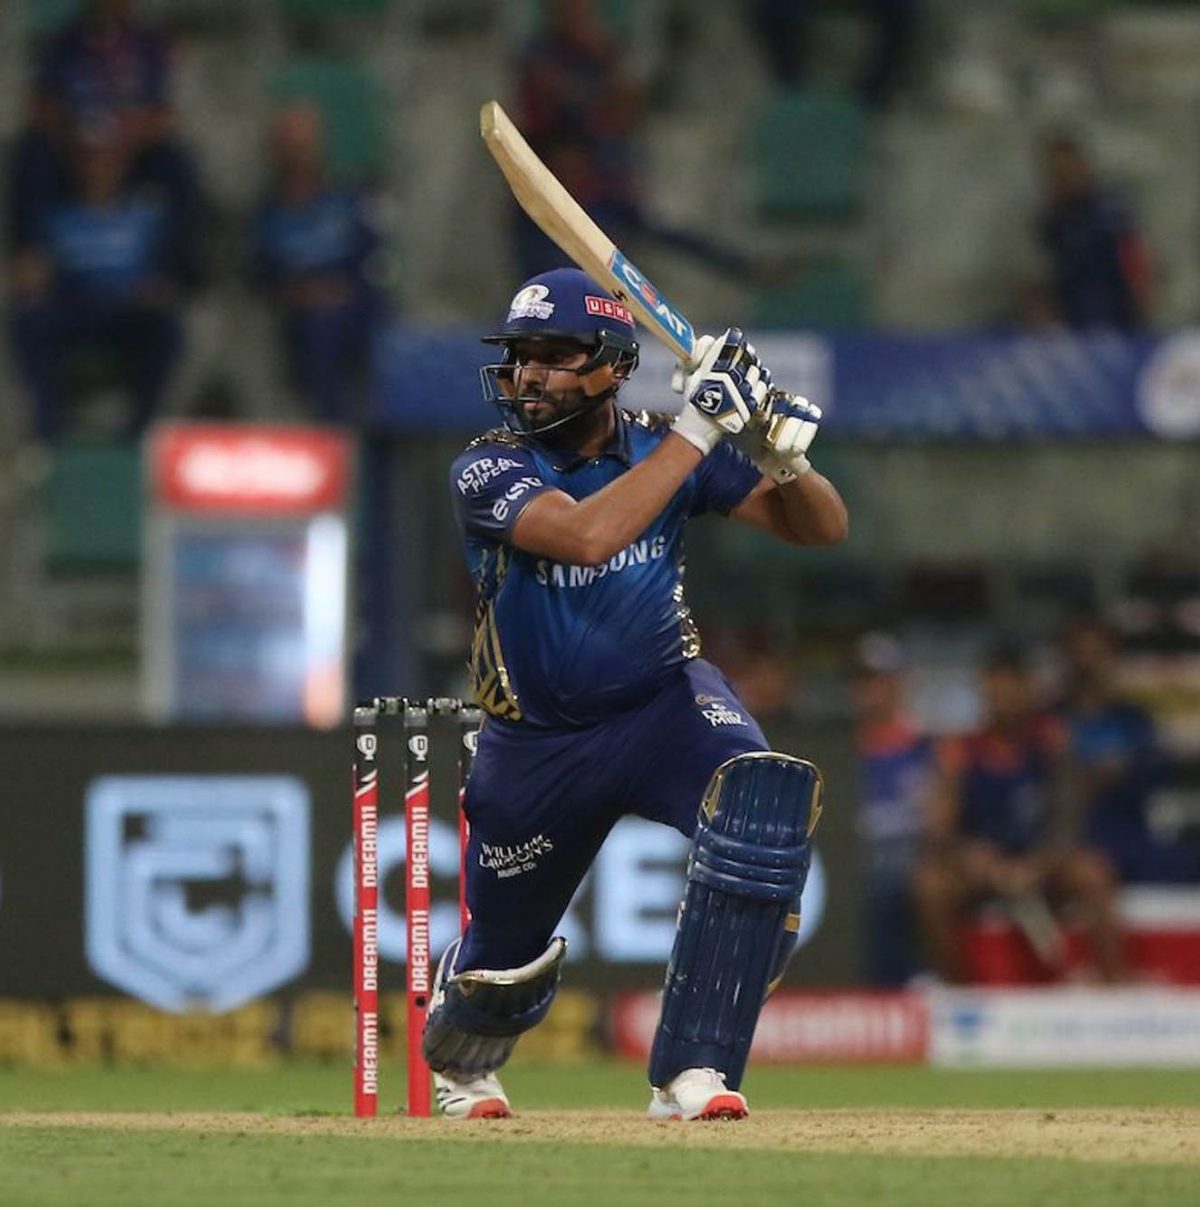 Mumbia Indians skipper Rohit Sharma scored 80 off just 54 balls to set up his team’s win over the Kol kata Knight Riders. (Photo courtesy IPL website)